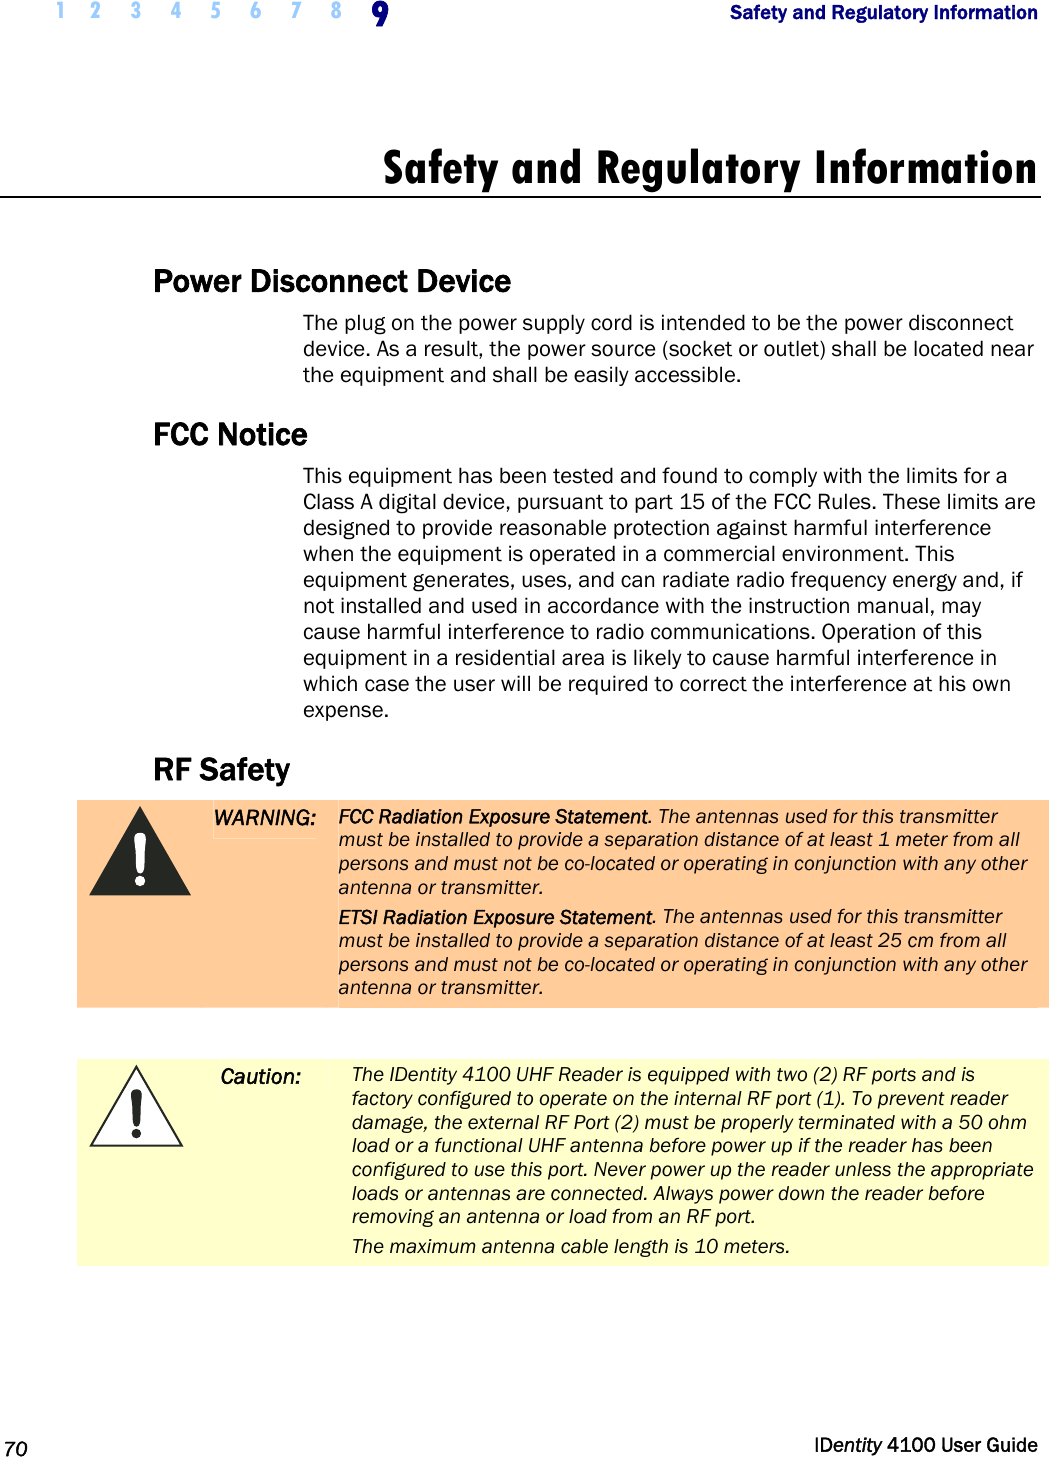  1 2 3 4 5 6 7 8 9    Safety and Regulatory Information   70  IDentity 4100 User Guide  Safety and Regulatory Information  Power Disconnect Device The plug on the power supply cord is intended to be the power disconnect device. As a result, the power source (socket or outlet) shall be located near the equipment and shall be easily accessible.  FCC Notice This equipment has been tested and found to comply with the limits for a Class A digital device, pursuant to part 15 of the FCC Rules. These limits are designed to provide reasonable protection against harmful interference when the equipment is operated in a commercial environment. This equipment generates, uses, and can radiate radio frequency energy and, if not installed and used in accordance with the instruction manual, may cause harmful interference to radio communications. Operation of this equipment in a residential area is likely to cause harmful interference in which case the user will be required to correct the interference at his own expense. RF Safety  WARNING: FCC Radiation Exposure Statement. The antennas used for this transmitter must be installed to provide a separation distance of at least 1 meter from all persons and must not be co-located or operating in conjunction with any other antenna or transmitter. ETSI Radiation Exposure Statement. The antennas used for this transmitter must be installed to provide a separation distance of at least 25 cm from all persons and must not be co-located or operating in conjunction with any other antenna or transmitter.   Caution: The IDentity 4100 UHF Reader is equipped with two (2) RF ports and is factory configured to operate on the internal RF port (1). To prevent reader damage, the external RF Port (2) must be properly terminated with a 50 ohm load or a functional UHF antenna before power up if the reader has been configured to use this port. Never power up the reader unless the appropriate loads or antennas are connected. Always power down the reader before removing an antenna or load from an RF port. The maximum antenna cable length is 10 meters.  